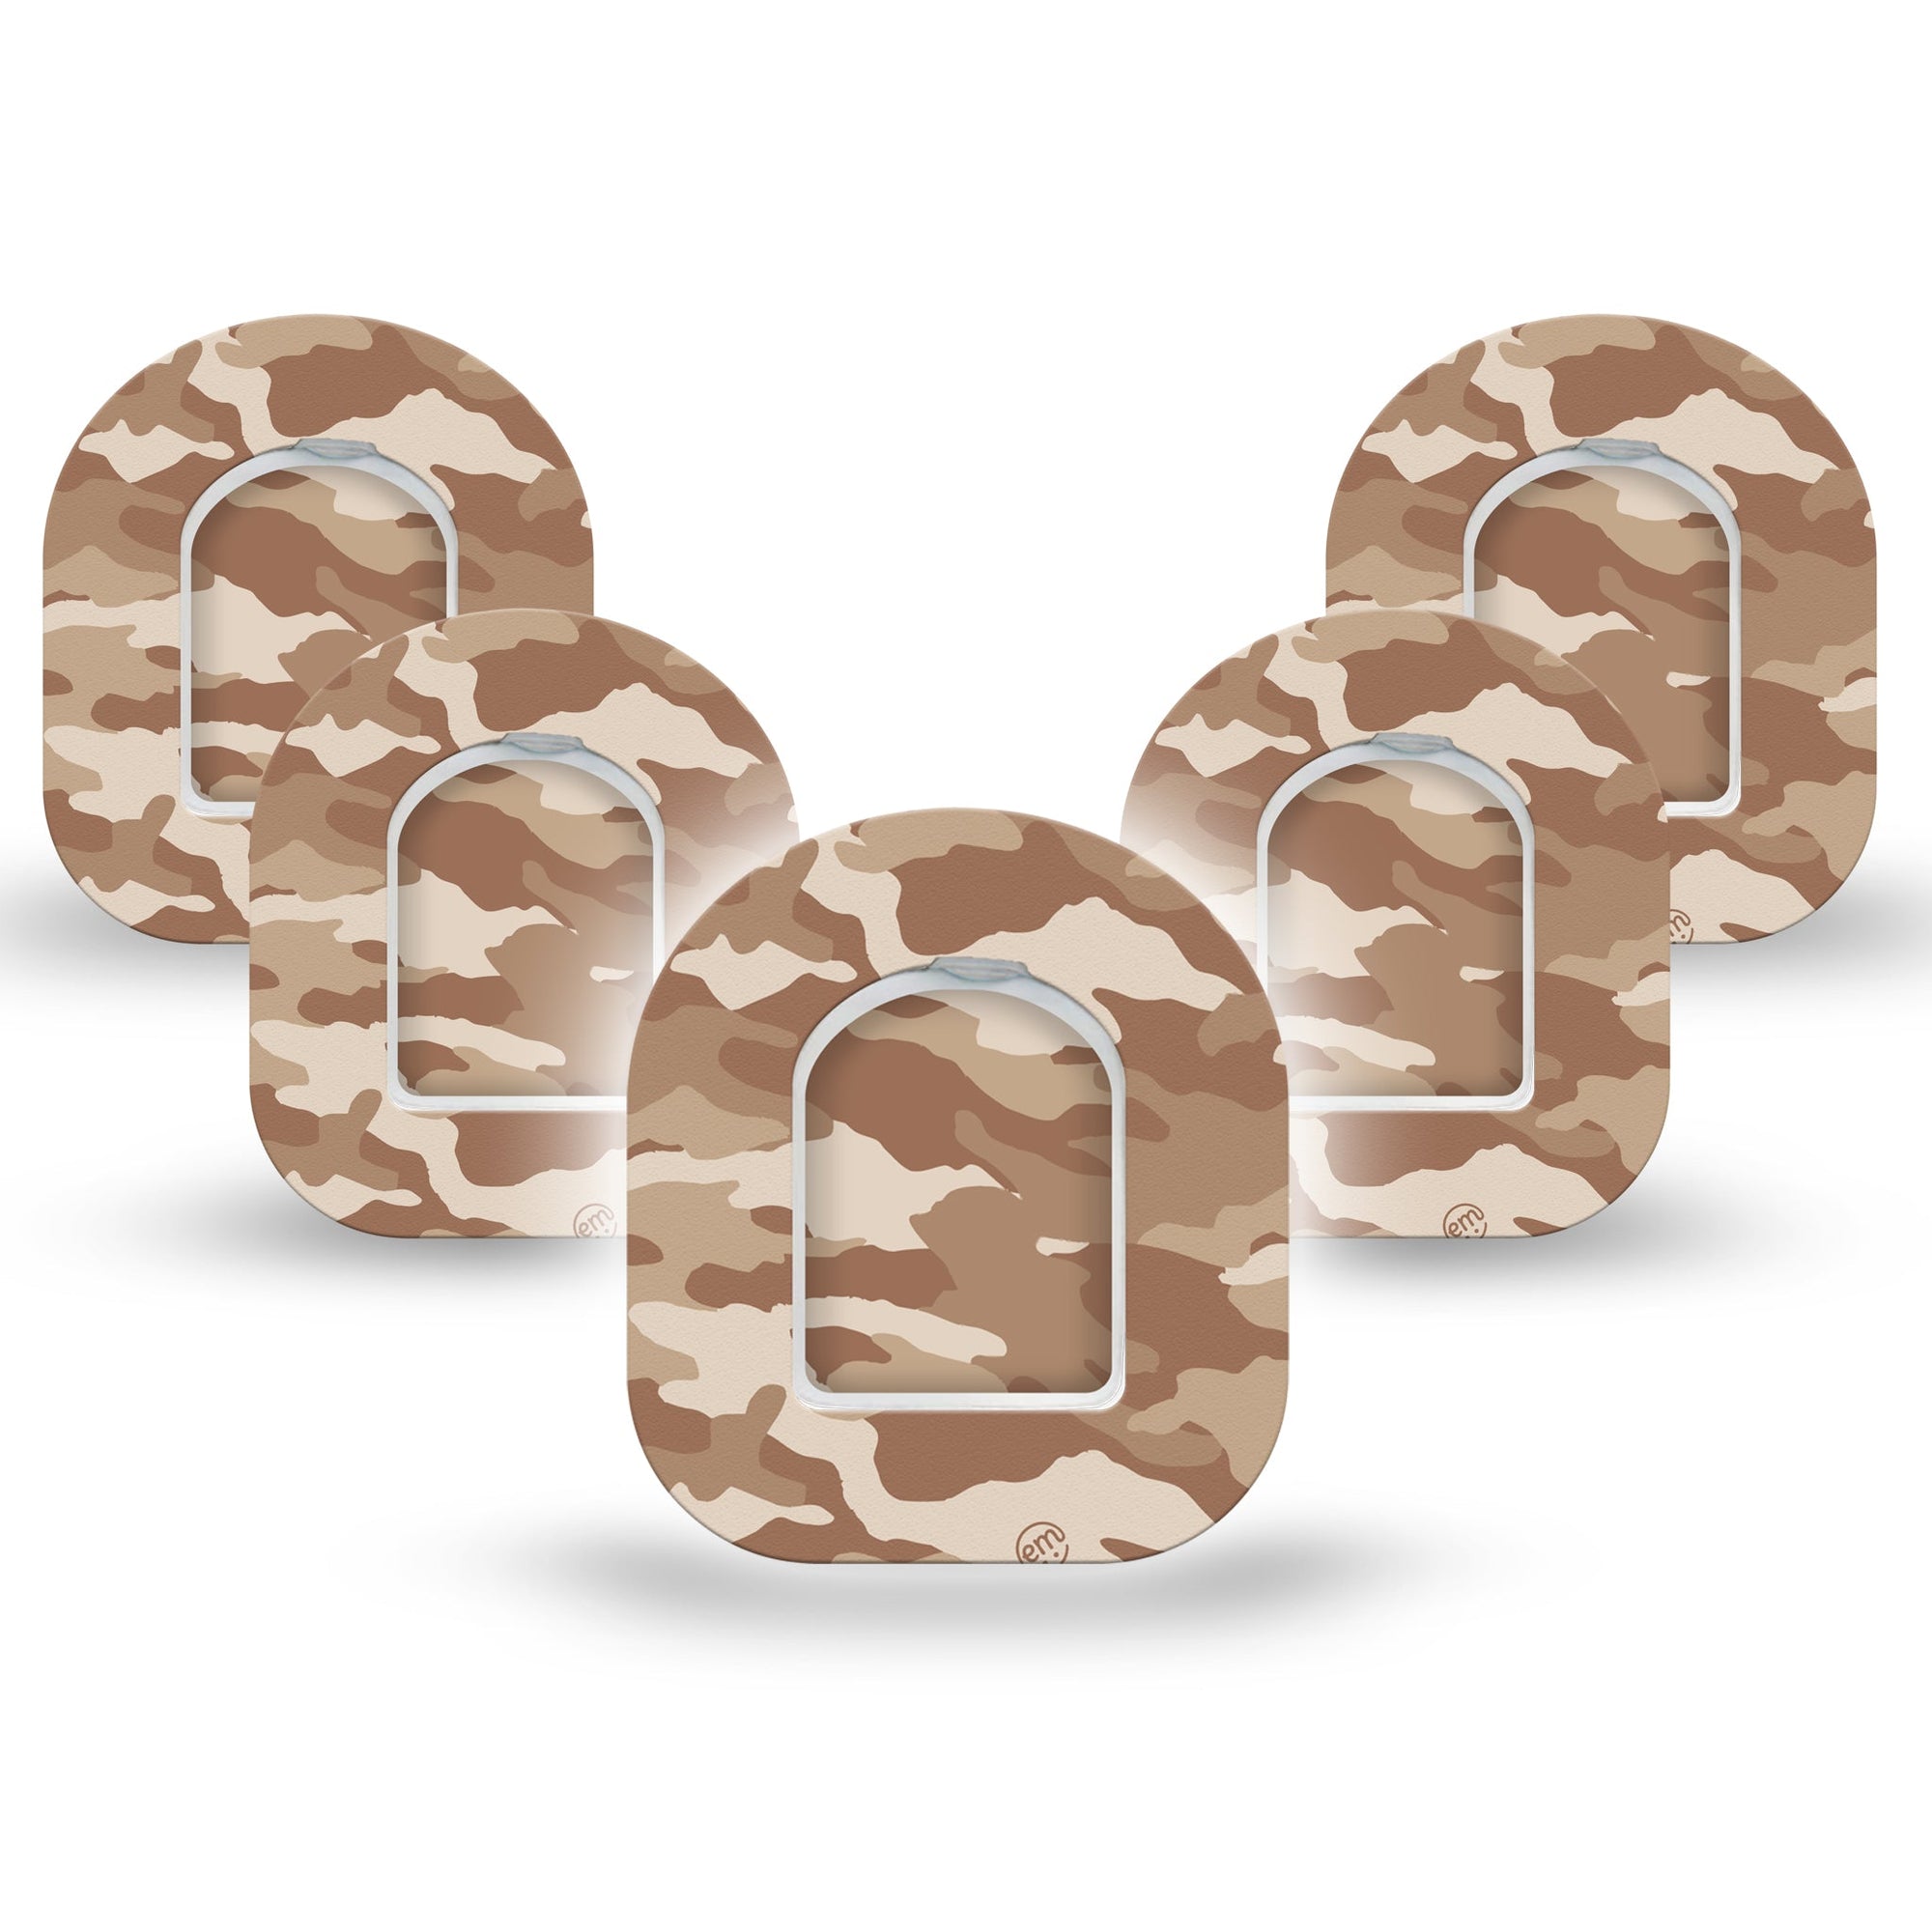 ExpressionMed Desert Camo Pod Mini Tape 5 Stickers and 5 Tapes, Camouflage Style Patch Pump Design